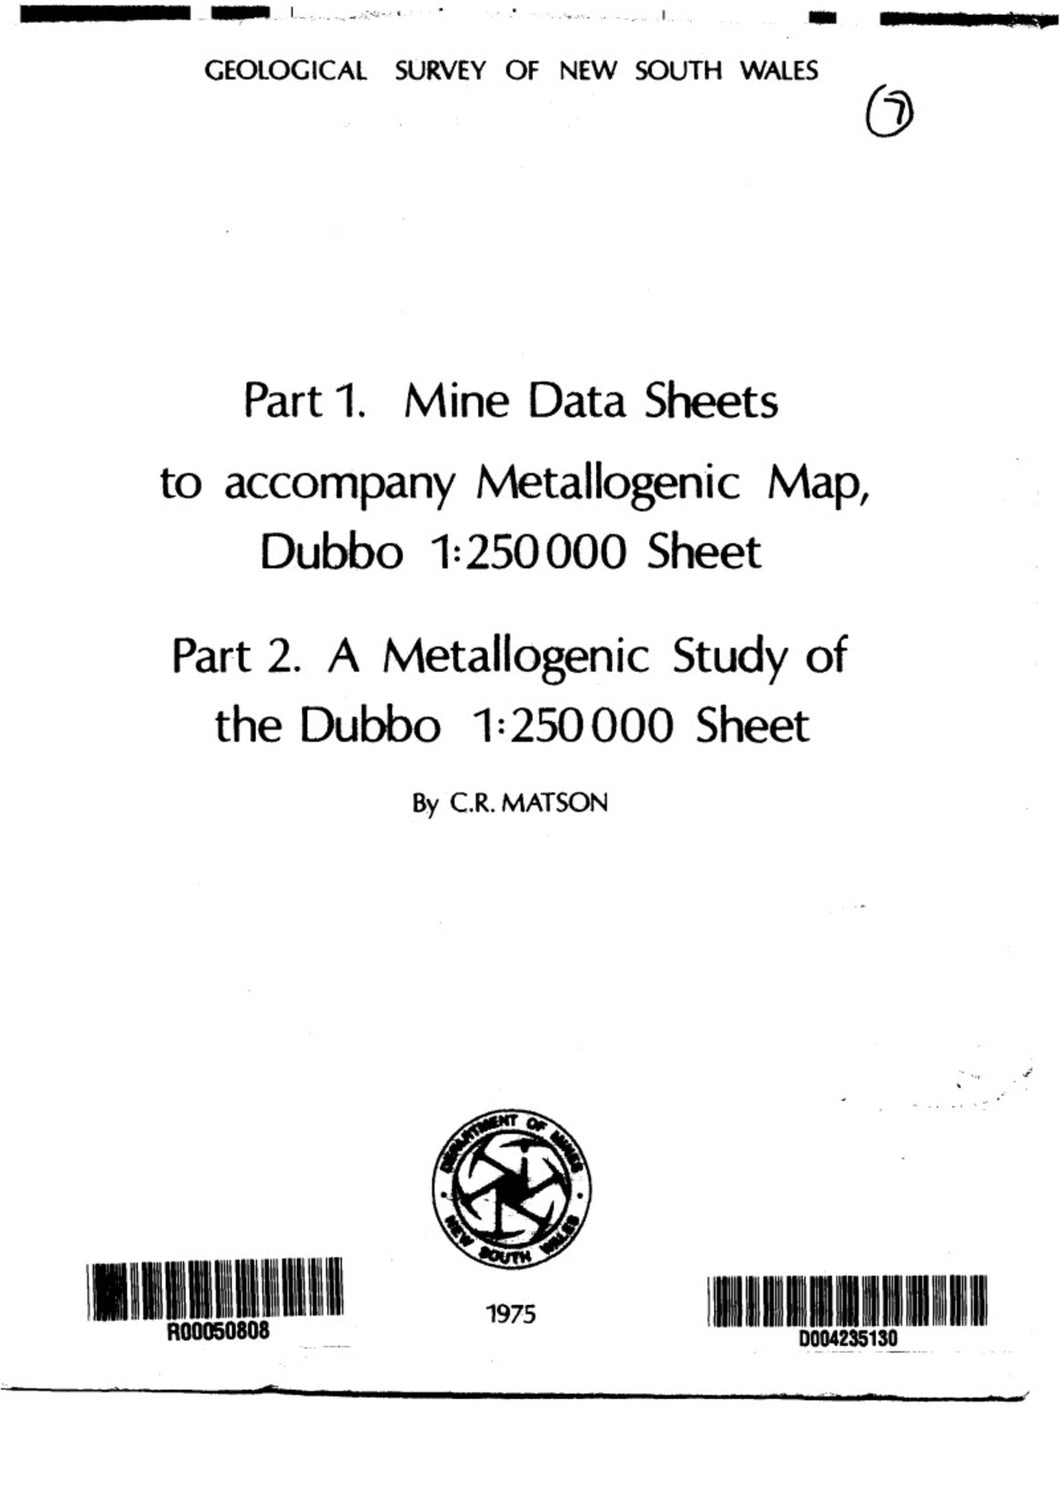 Image of Dubbo Metallogenic Map Explanatory Notes 1975 book cover